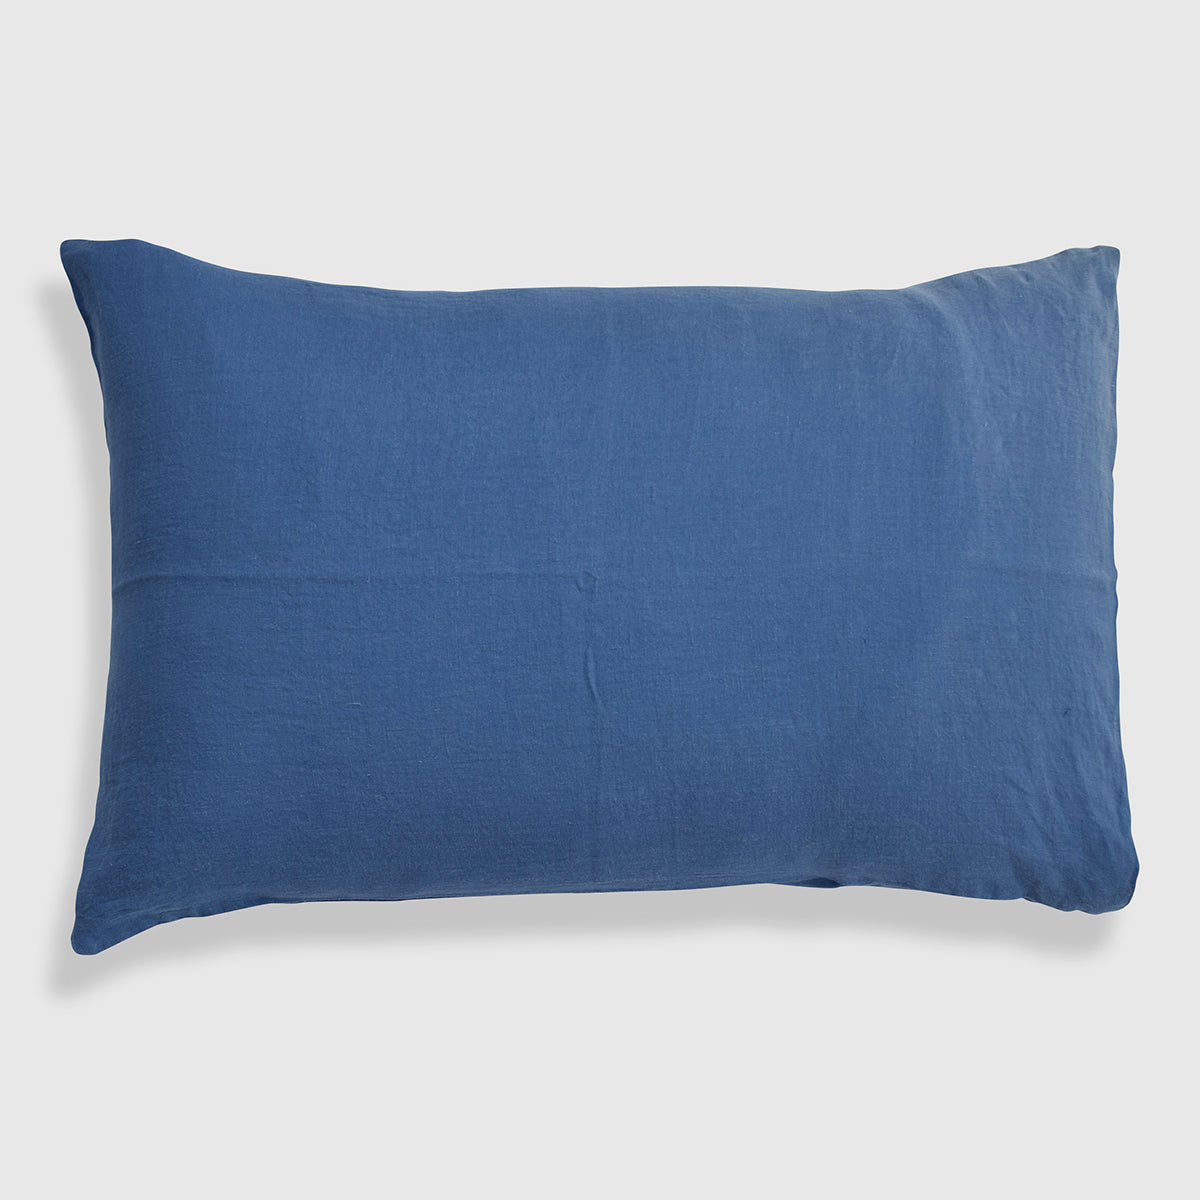 Linge Particulier Atlantic Blue Standard Linen Pillowcase Sham for a colorful linen bedding look in electric blue - Collyer&#39;s Mansion